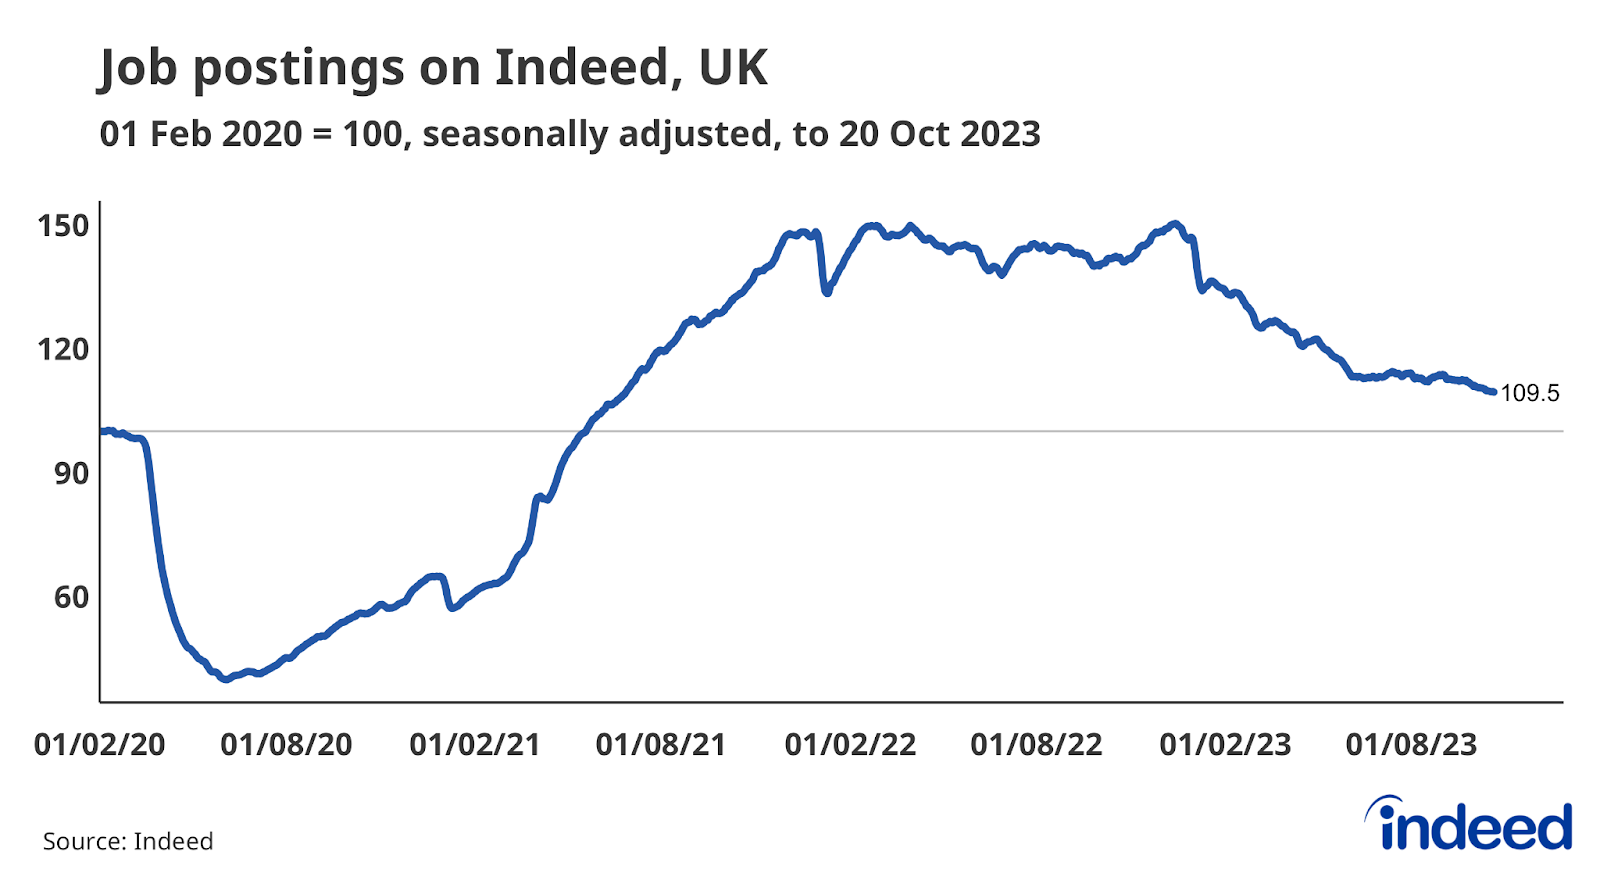 Chart titled “Job postings on Indeed, UK” showing the trend in job postings on Indeed in the UK from 1 February 2020 to 20 October 2023. Postings have slowed in recent months but remain almost 10% above their pre-pandemic baseline.  